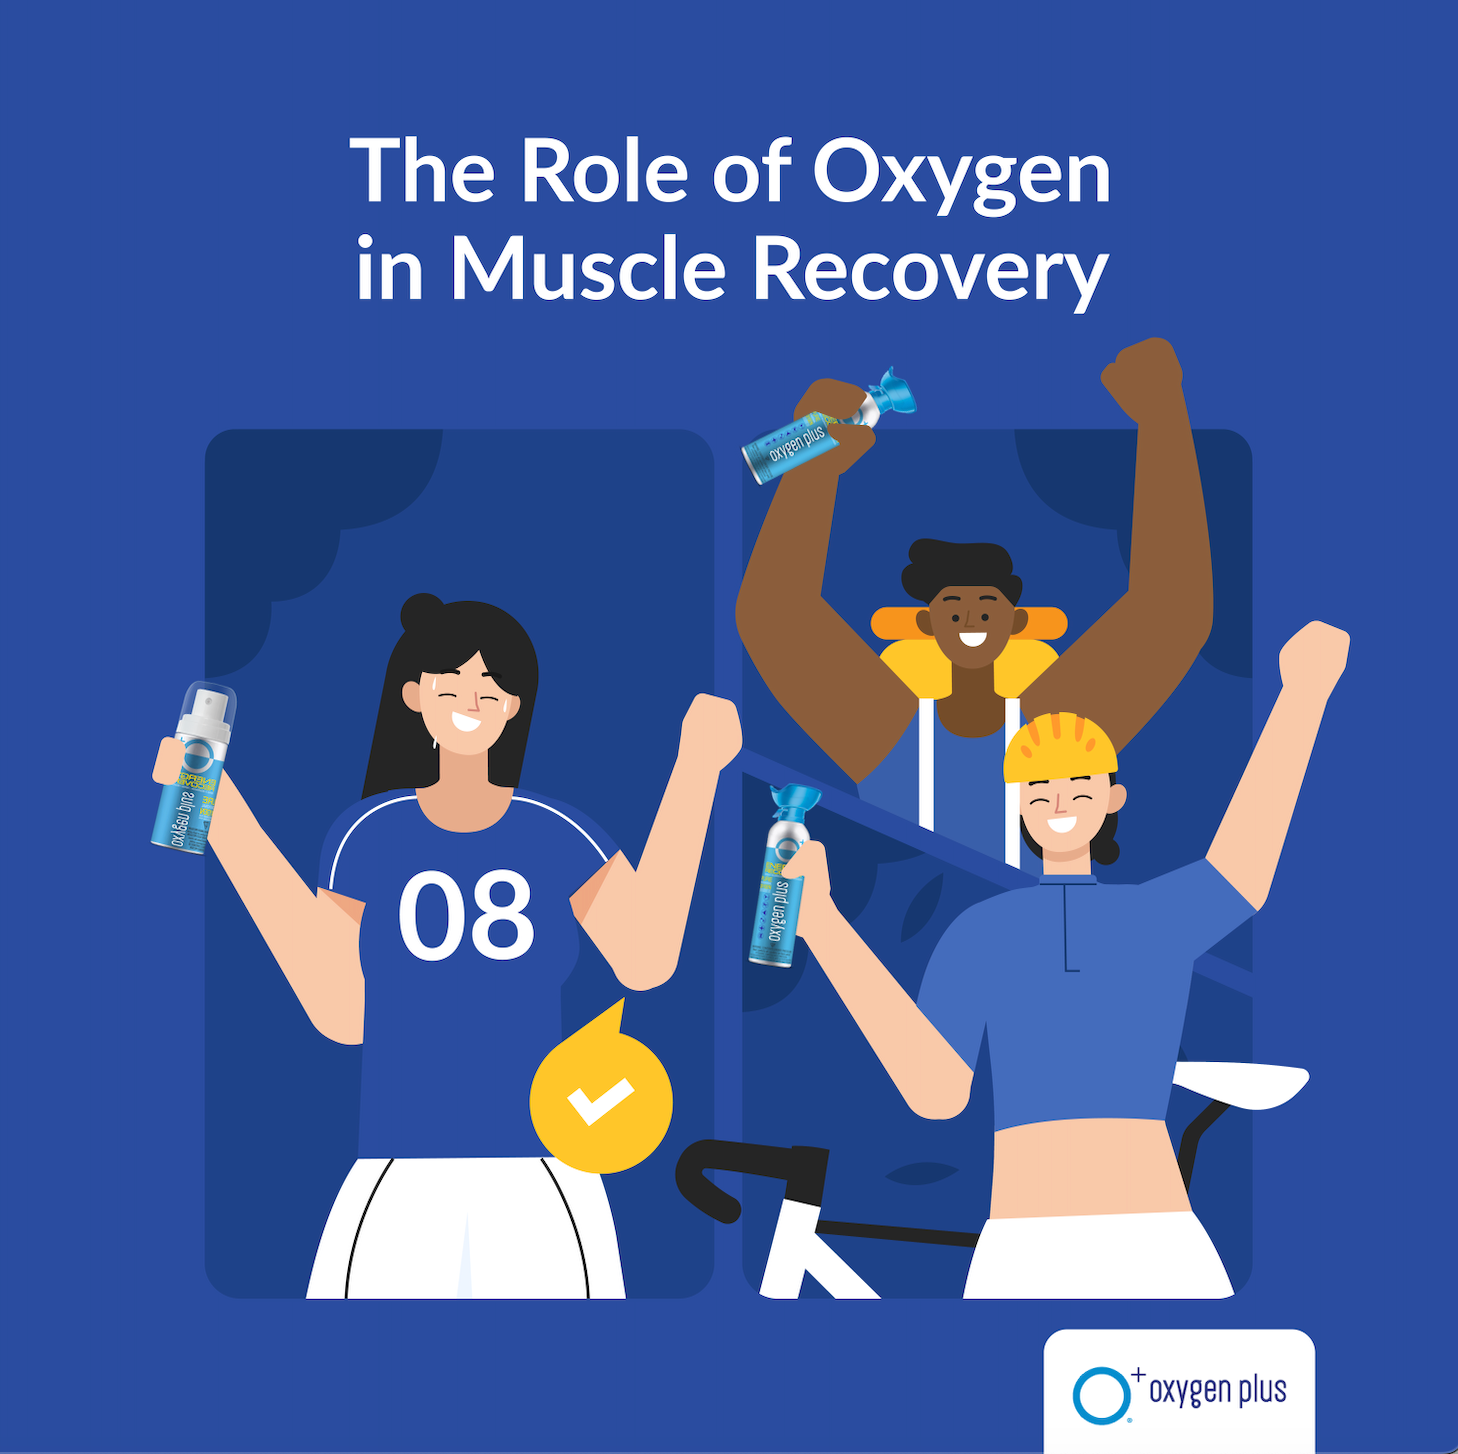 The role of oxygen in muscle recovery